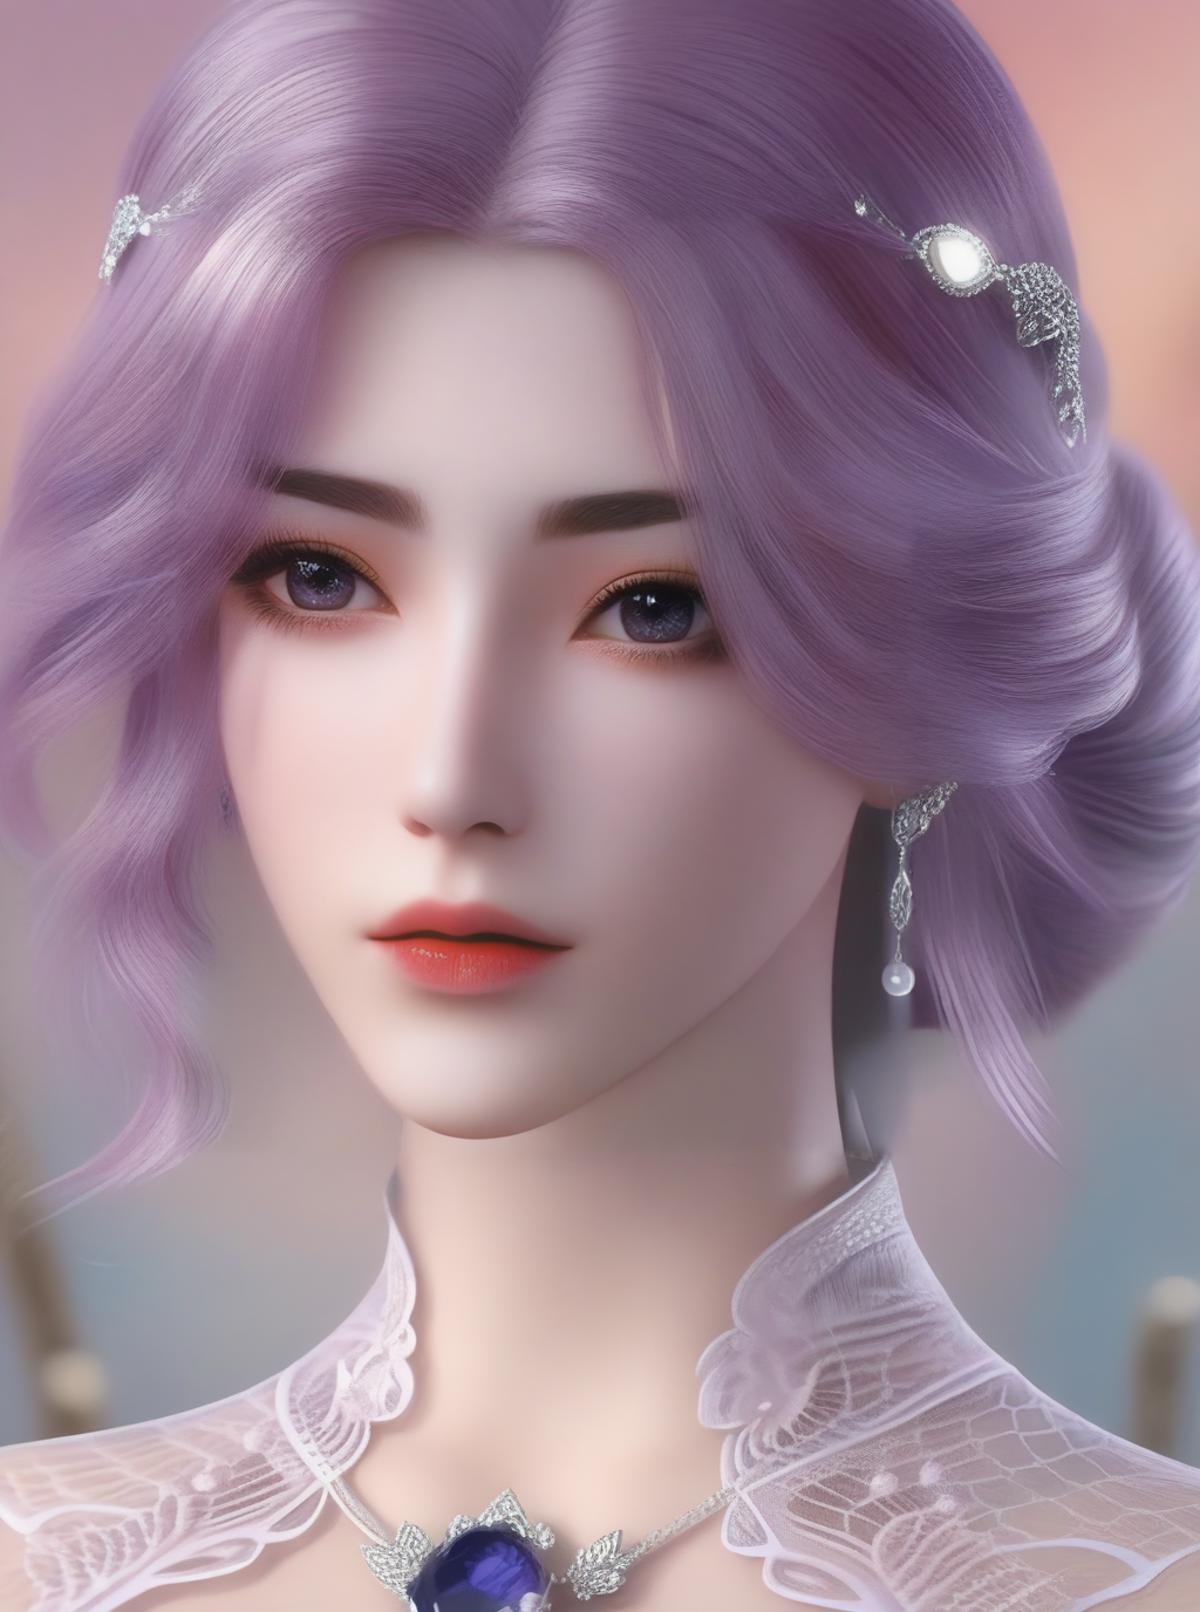 AI model image by ys